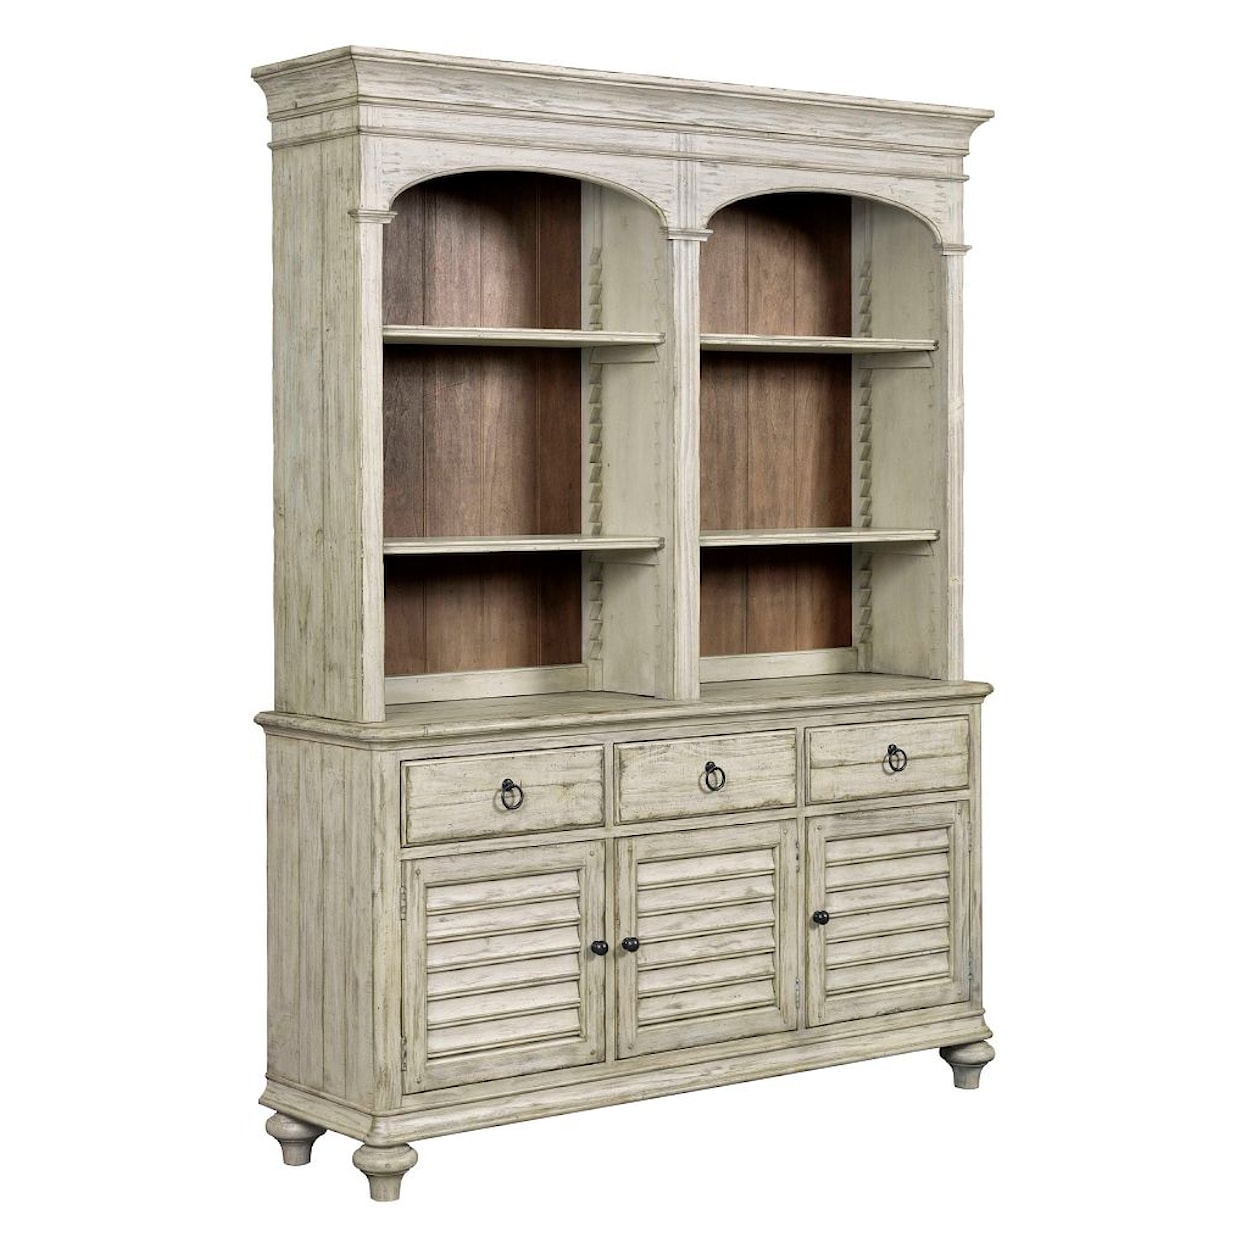 Kincaid Furniture Weatherford Hastings Open Hutch and Buffet